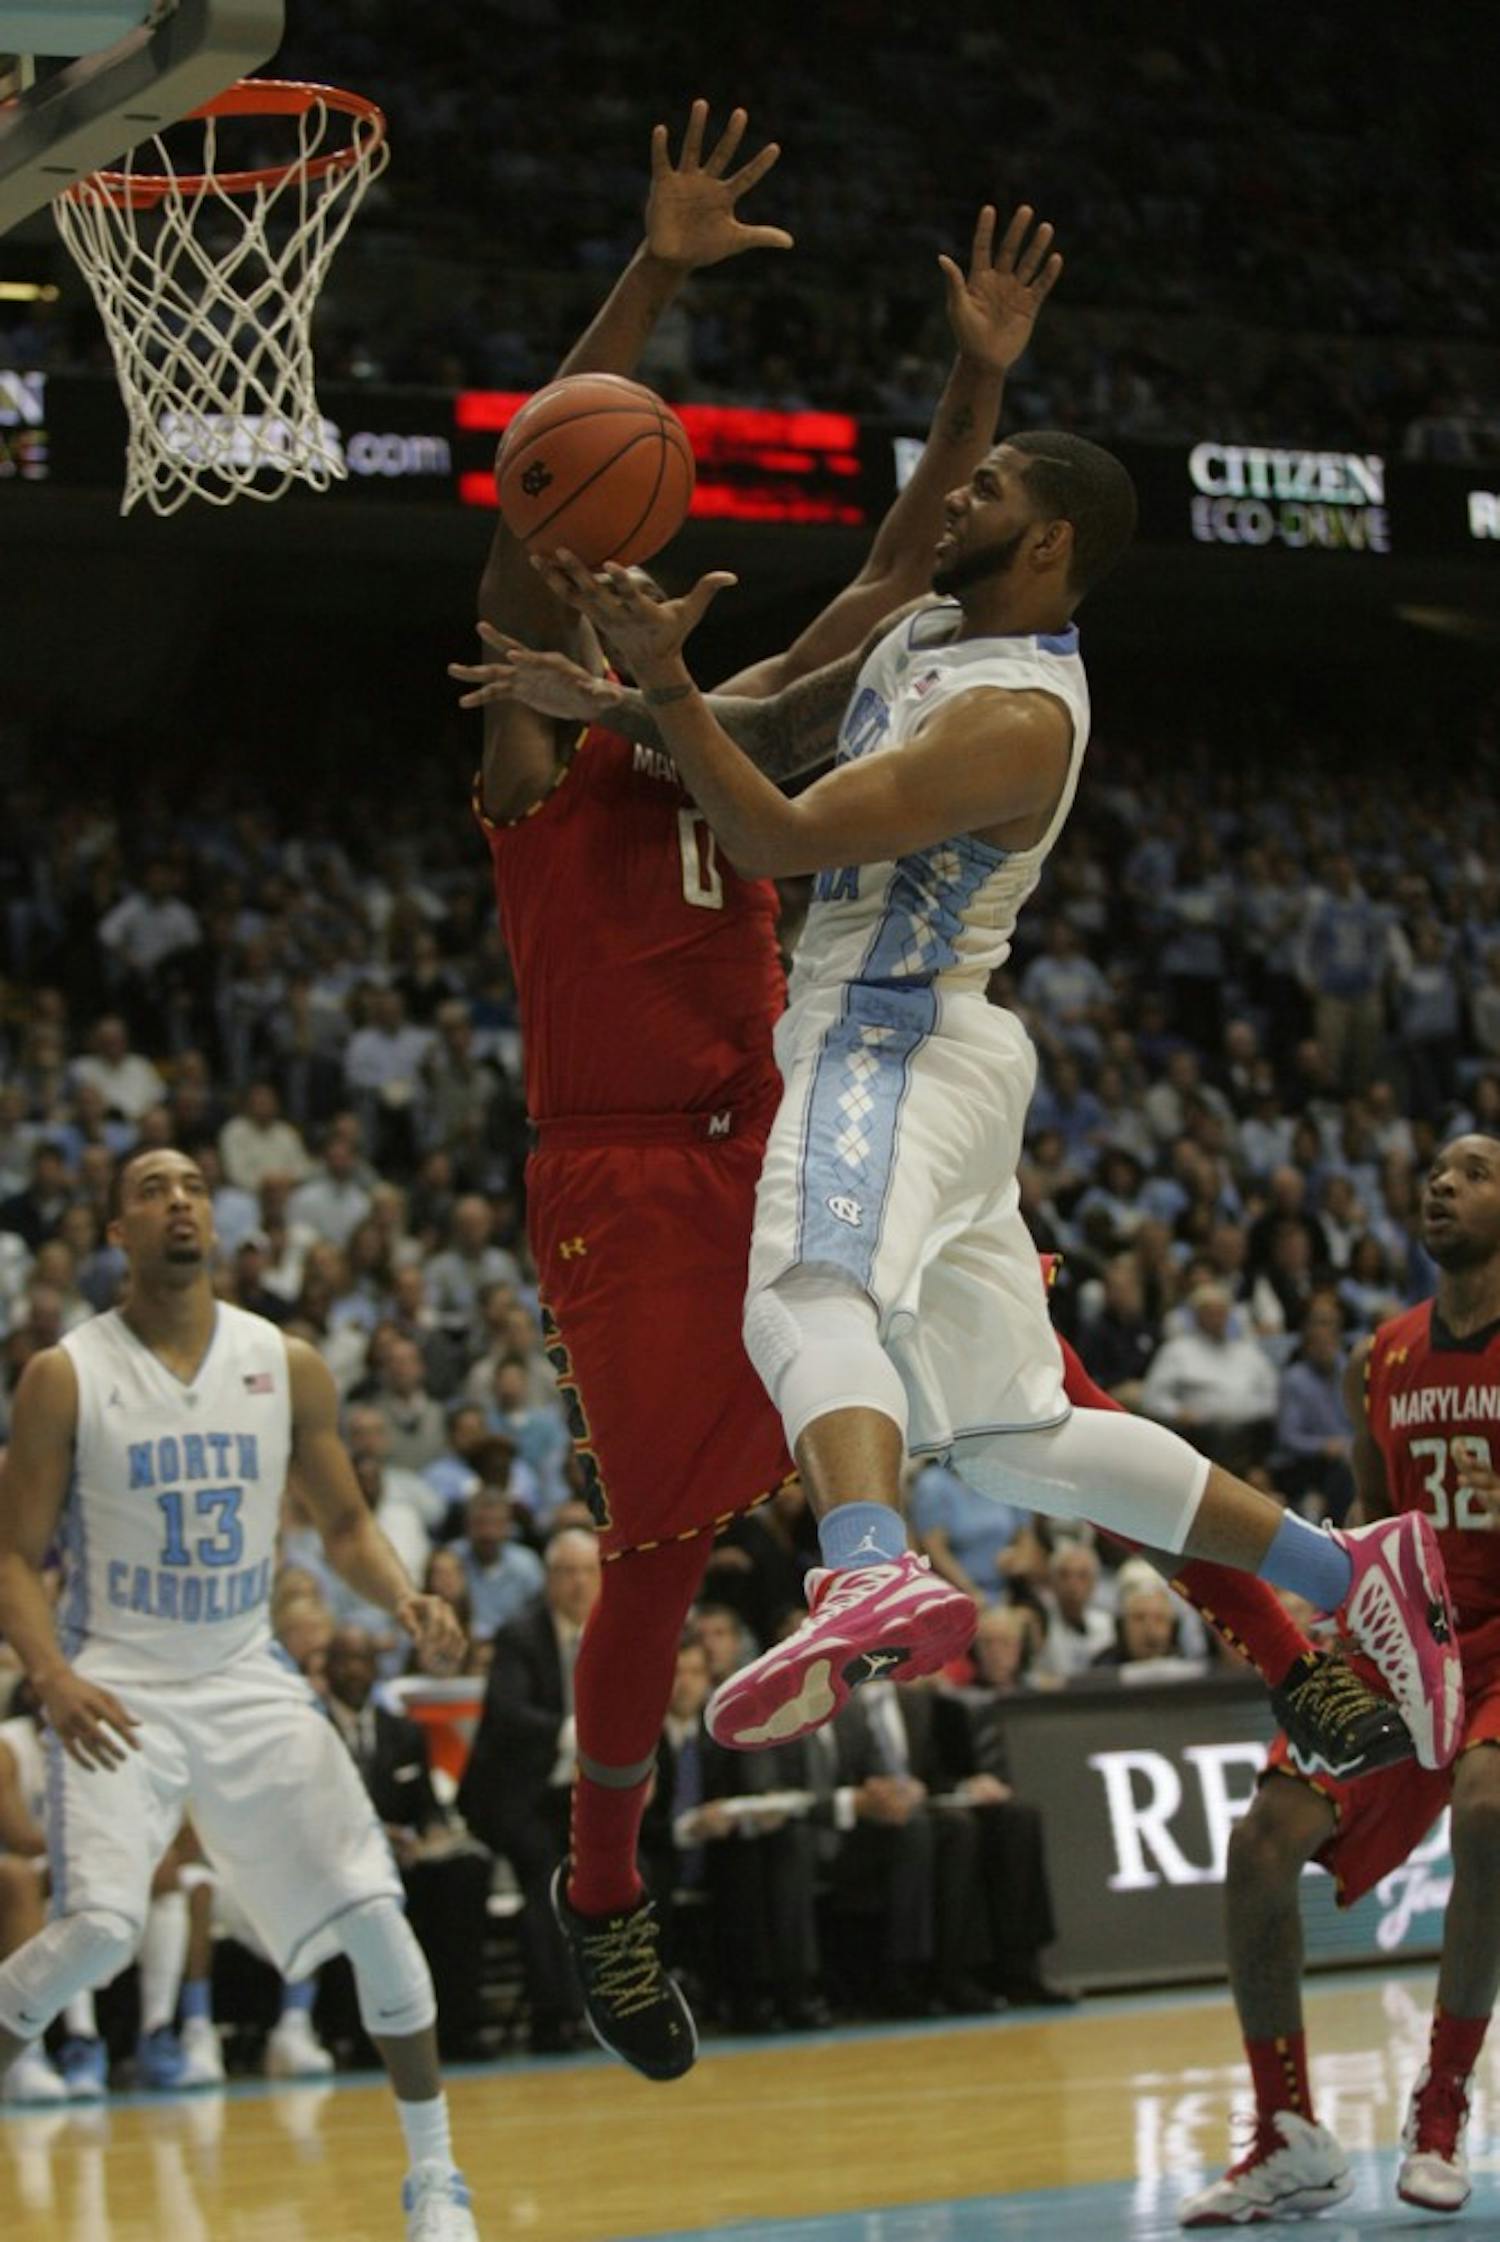 UNC defeated Maryland 75-63 in their last ACC meeting in Chapel hill, N.C. 